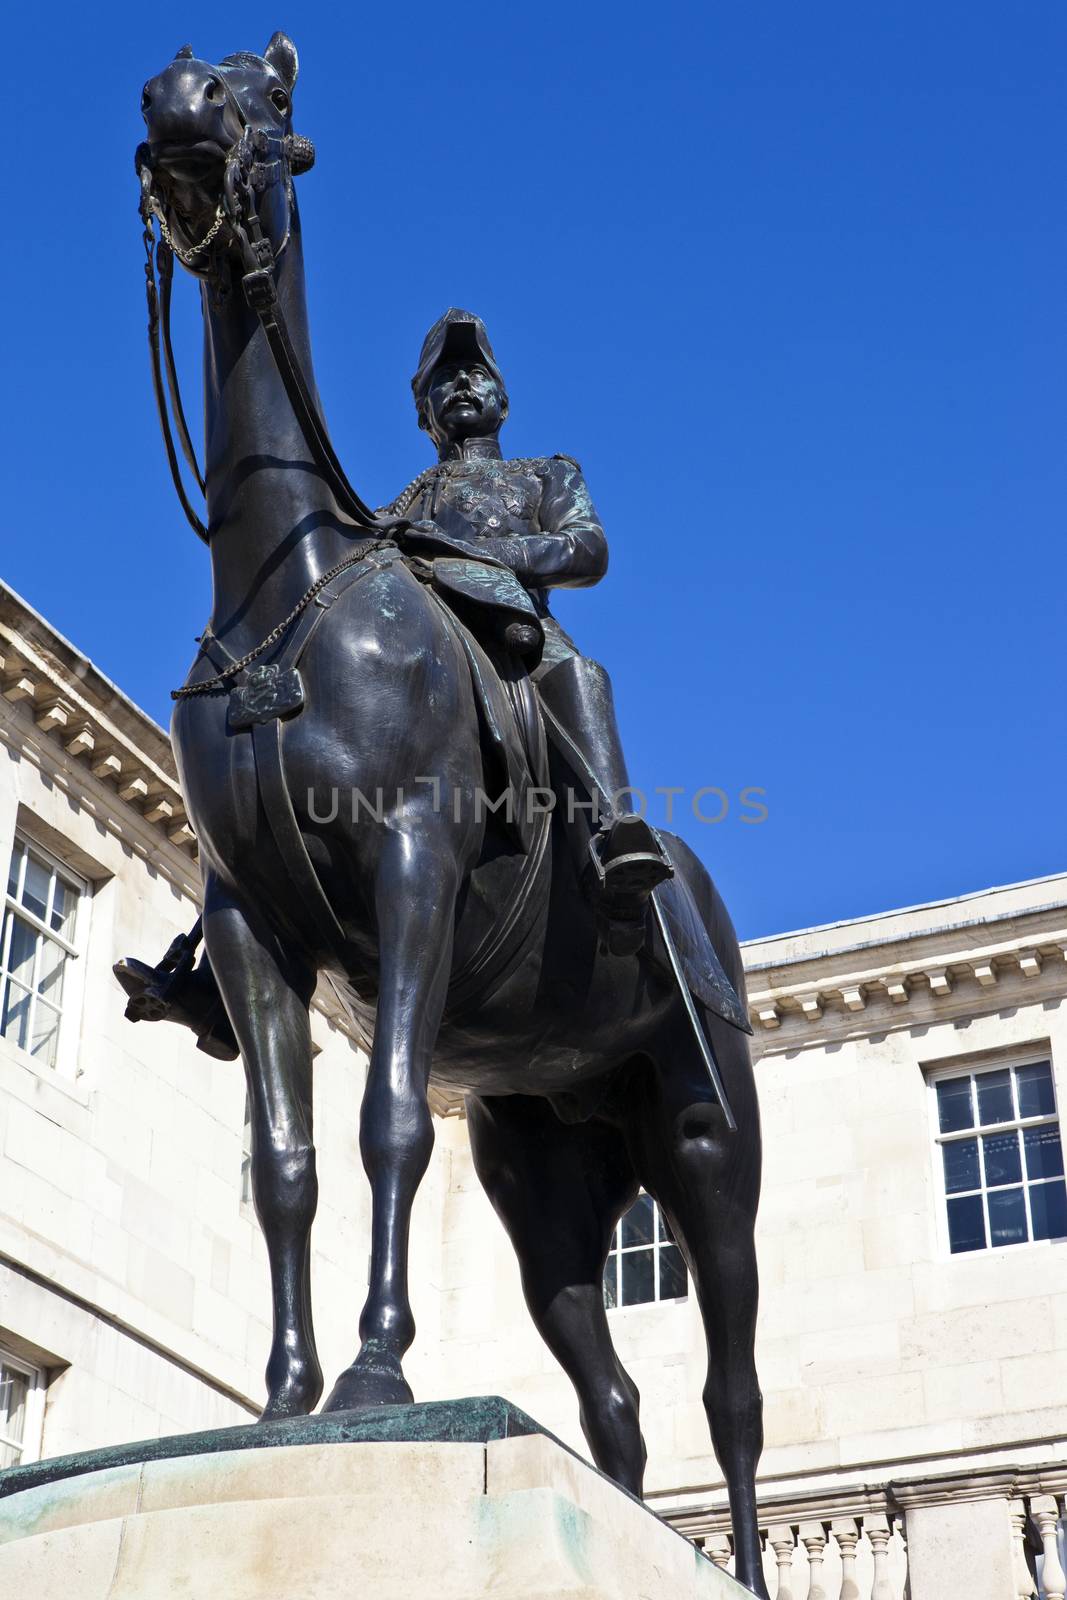 Viscount Wolseley Statue in Horseguards Parade by chrisdorney